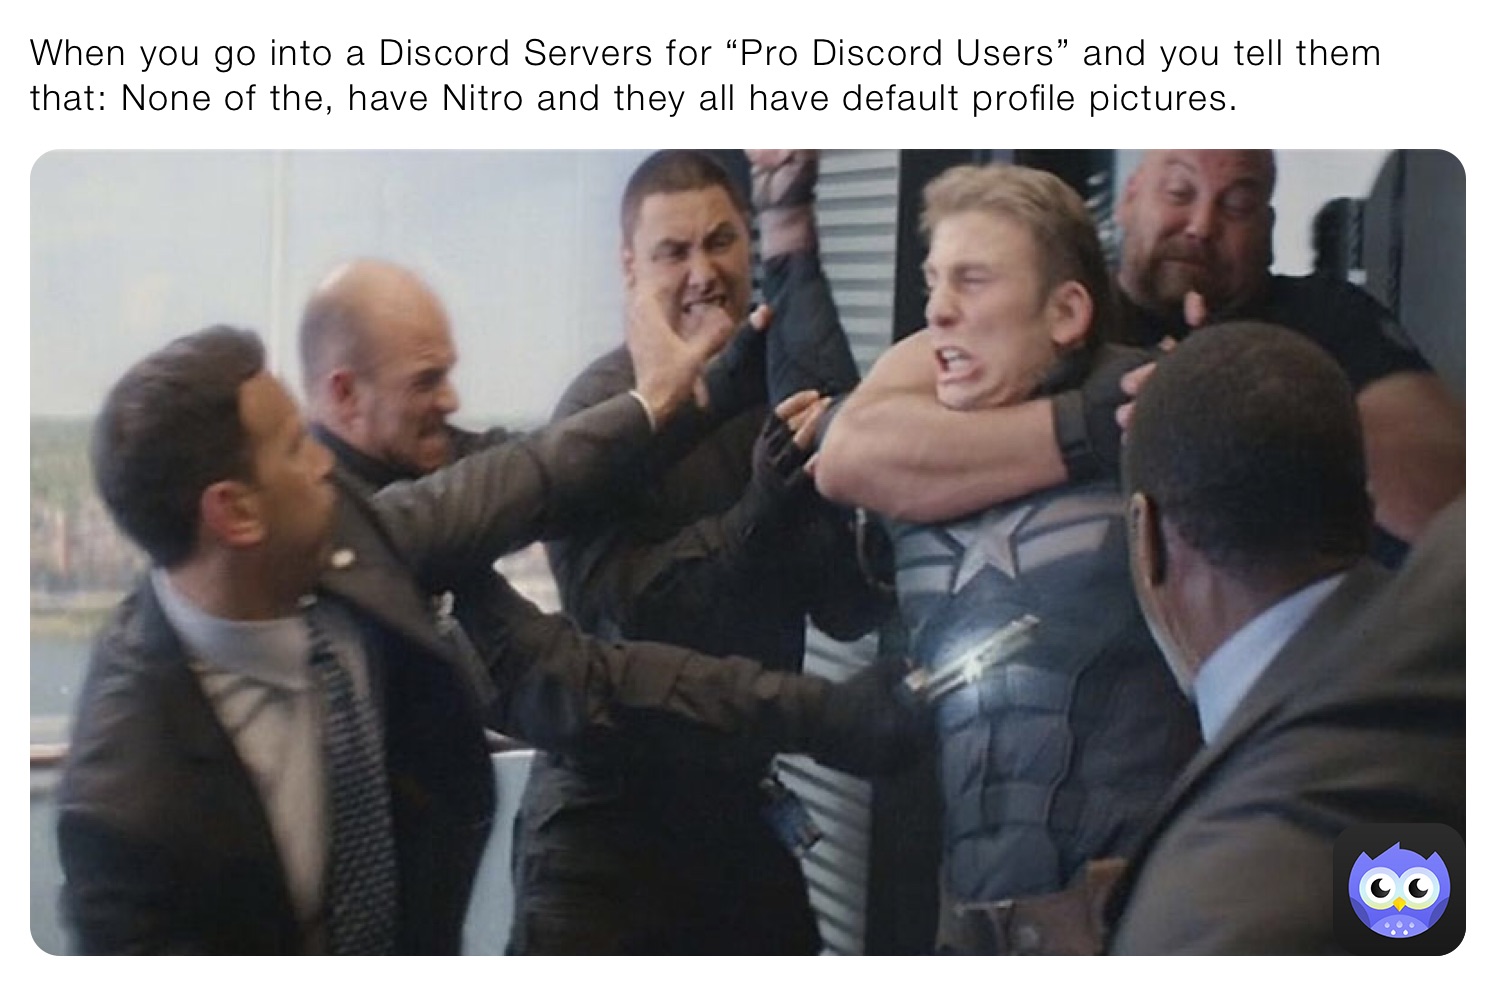 When you go into a Discord Servers for “Pro Discord Users” and you tell them that: None of the, have Nitro and they all have default profile pictures.